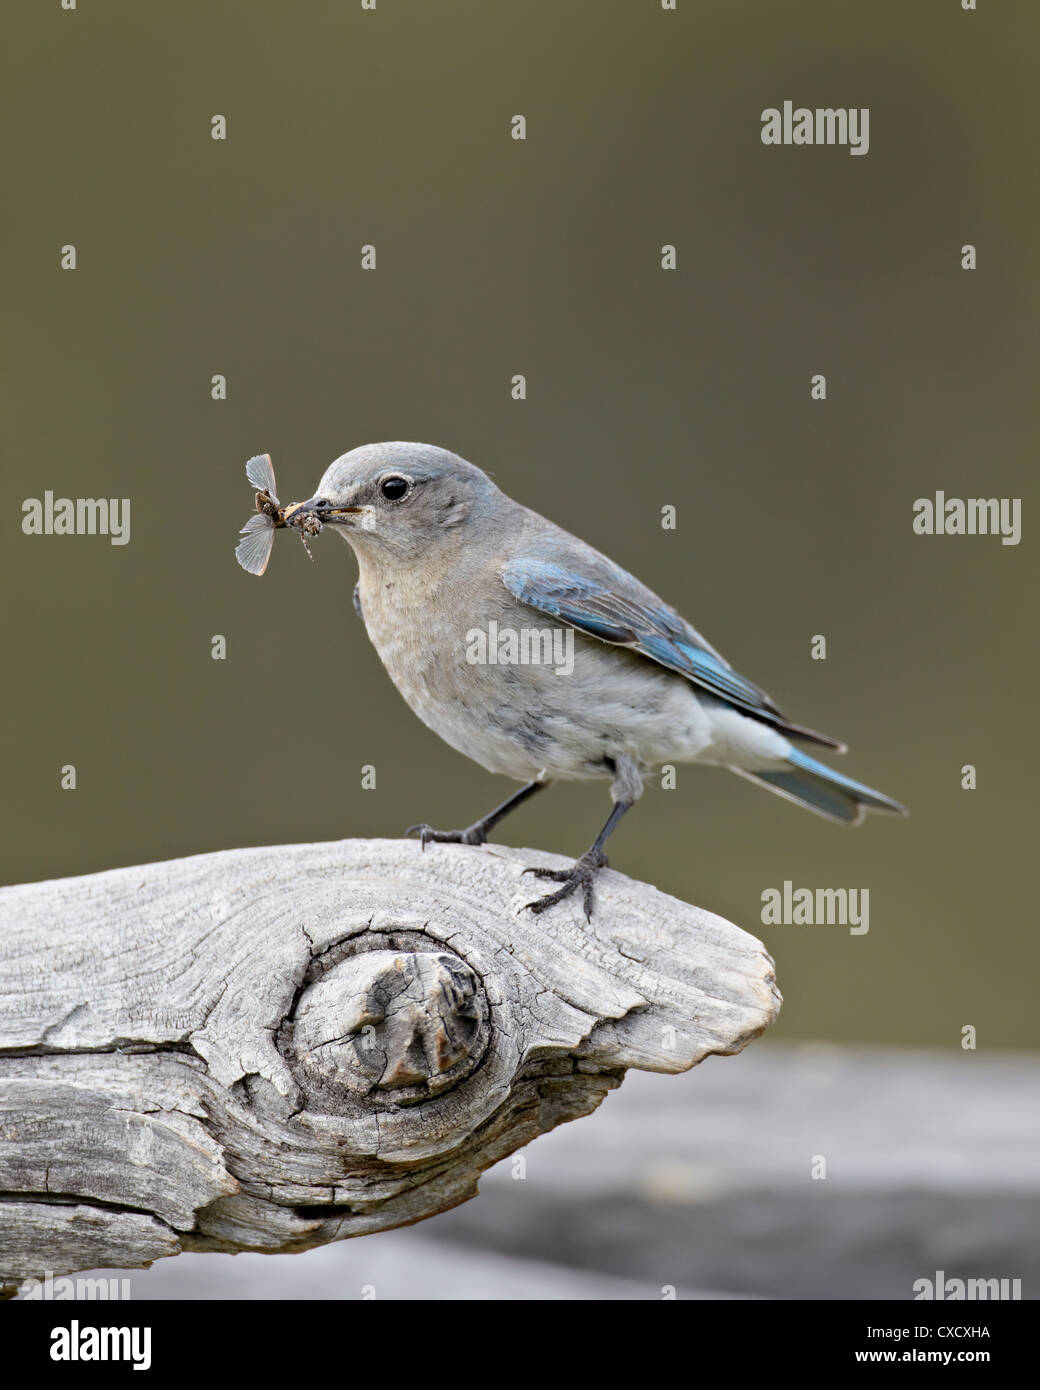 Female mountain bluebird (Sialia currucoides) with an insect, Yellowstone National Park, Wyoming, United States of America Stock Photo